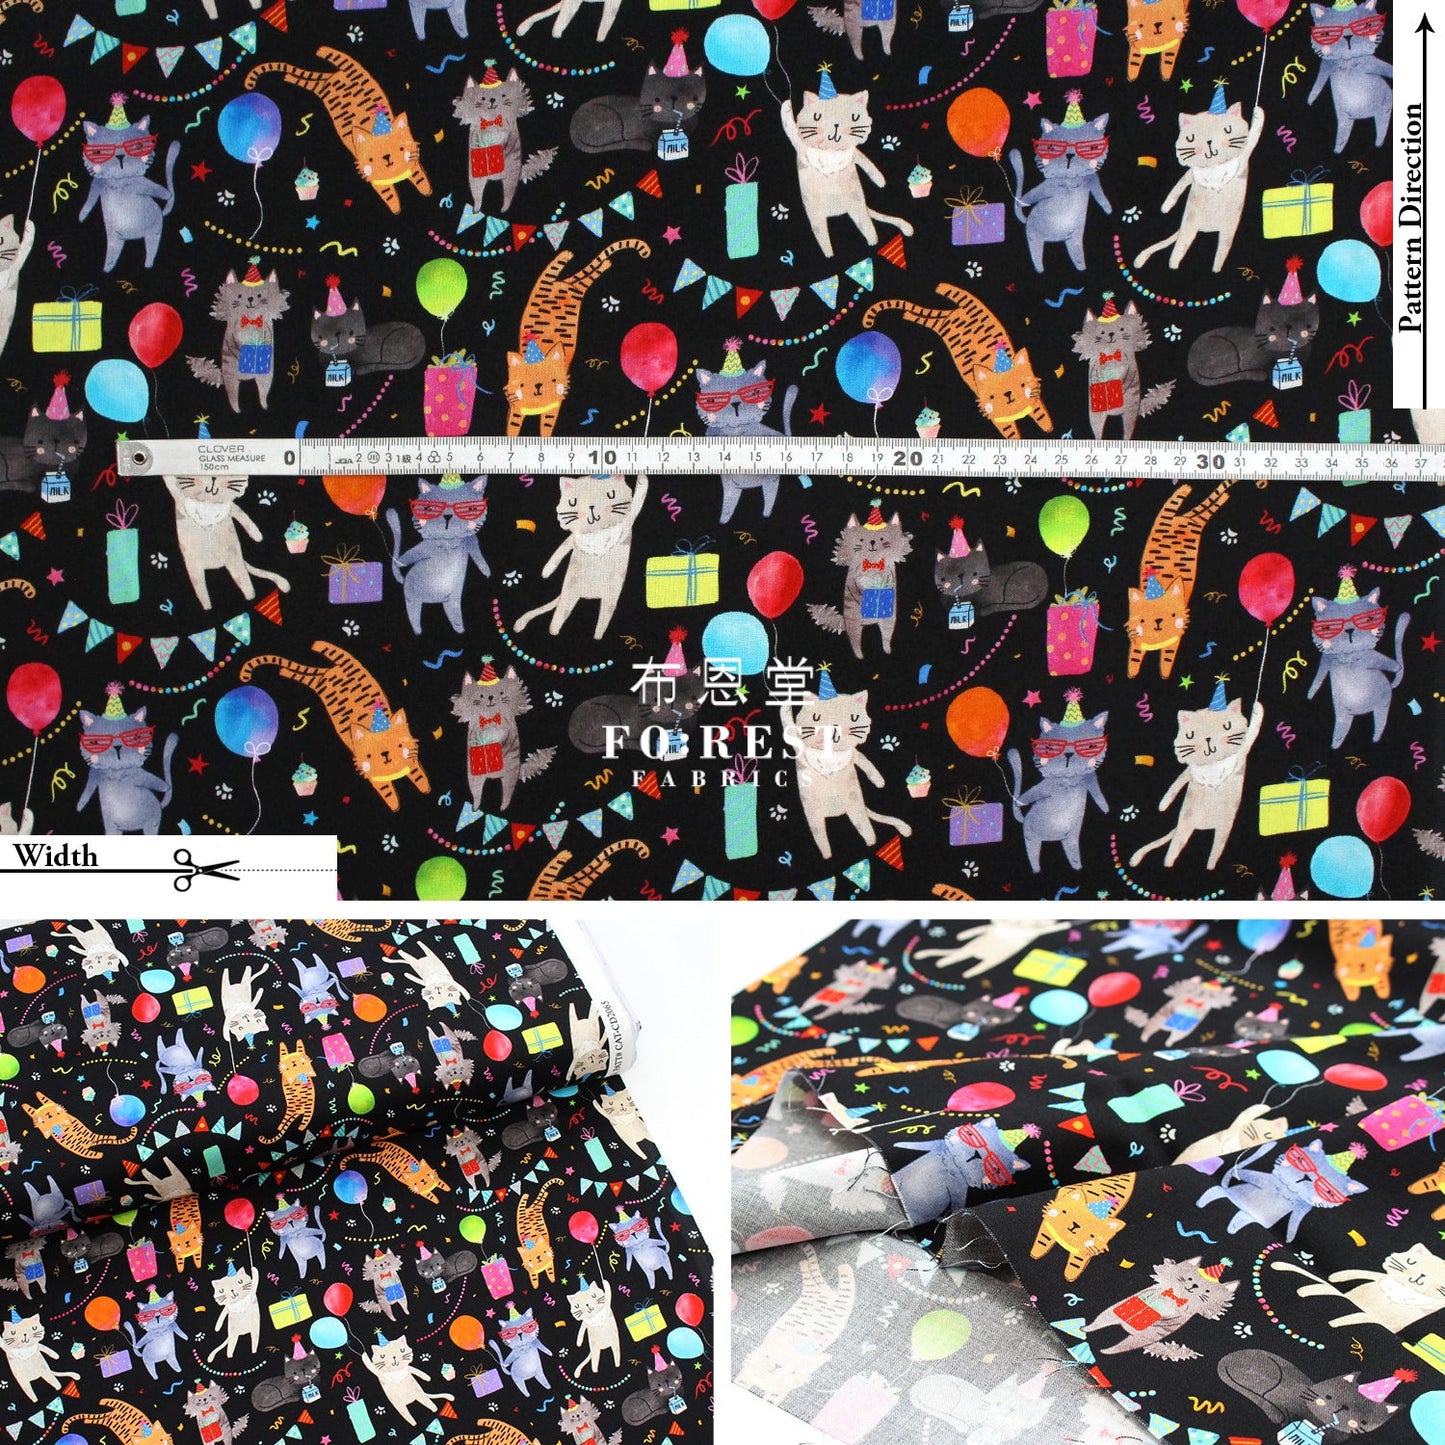 Cotton - Party Animal Cats Fabric Black